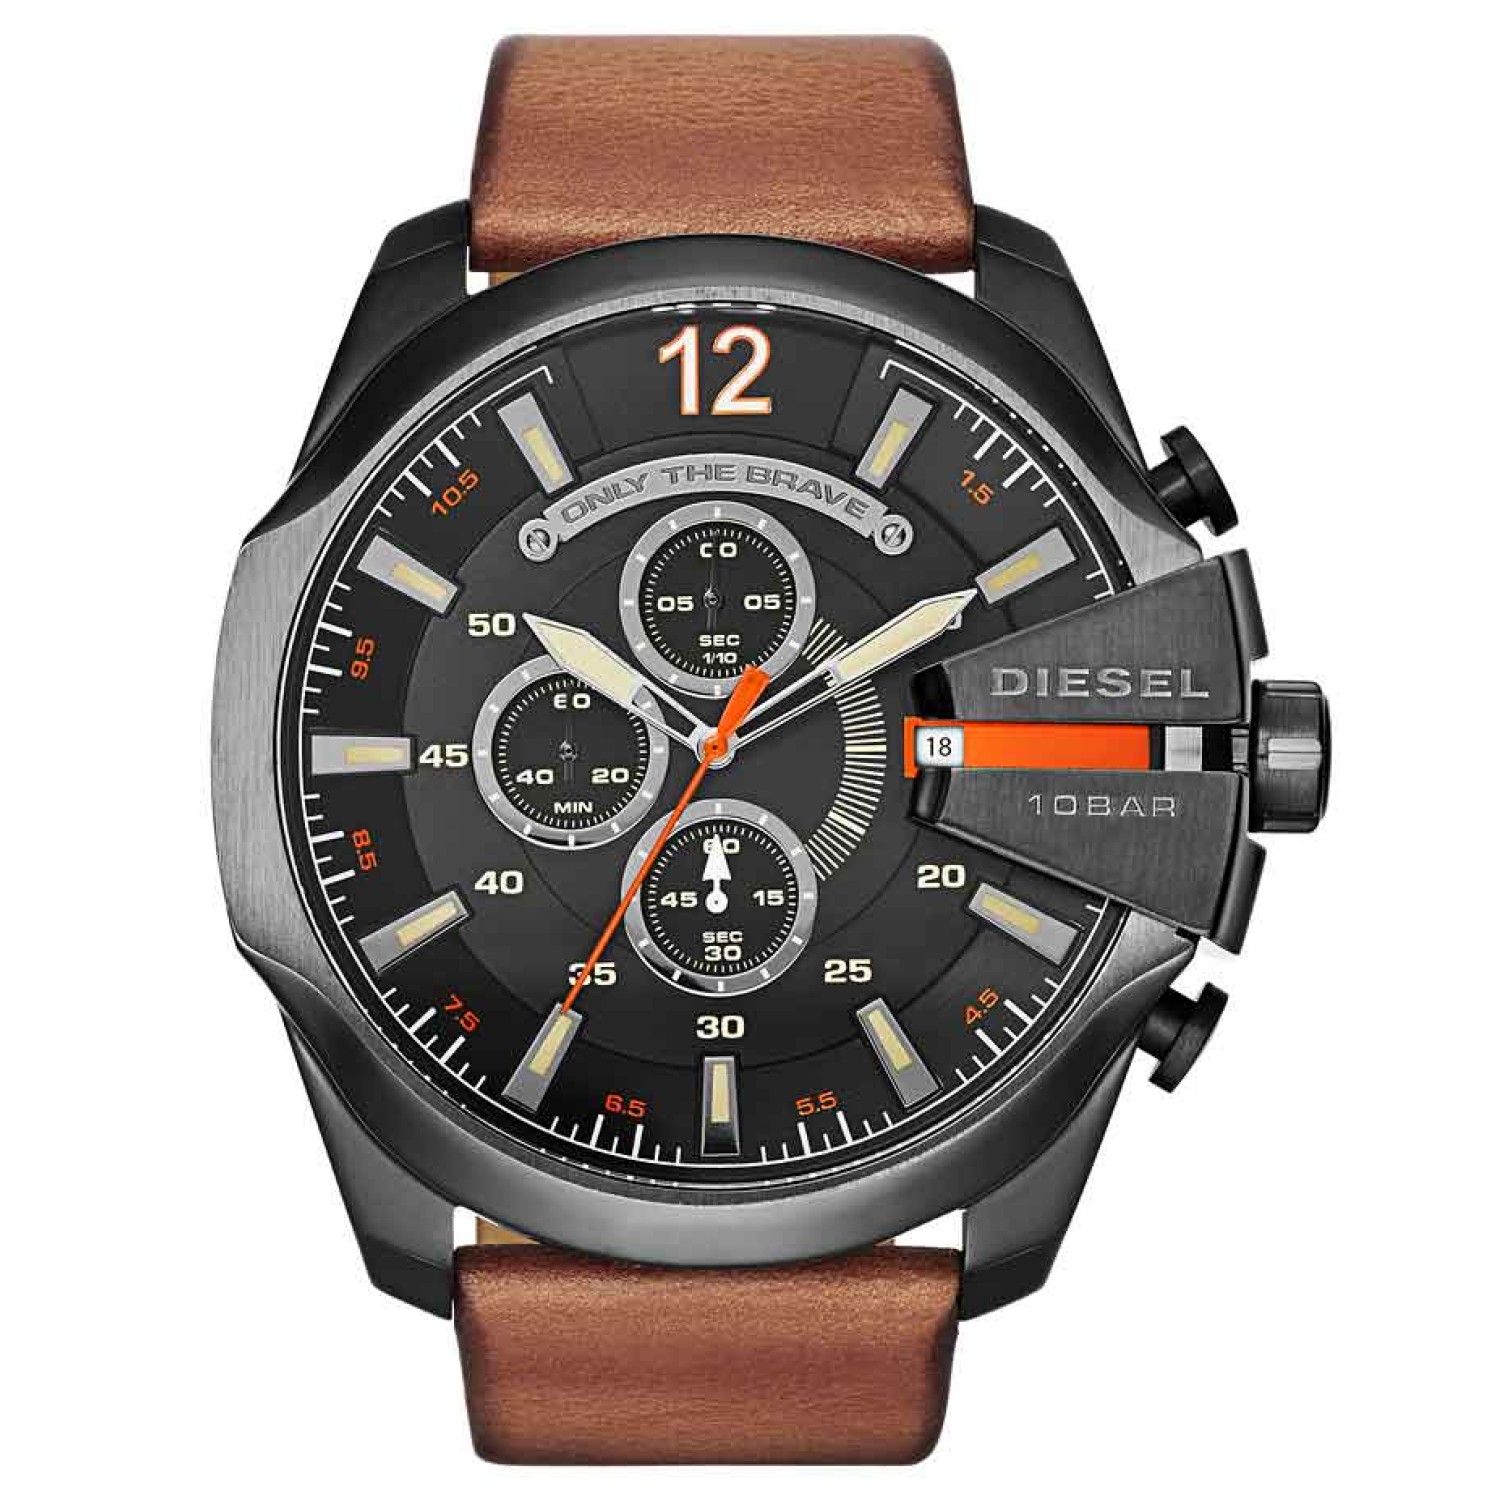 DZ4343 Diesel Master Chief Chronograph Watch. Burnished brown leather and gunmetal plating make the perfect pair in this instantly iconic update to Diesel’s mega Chief collection.  3 Months No Payments and Interest for Q Card holders 2 Year Guarantee and 